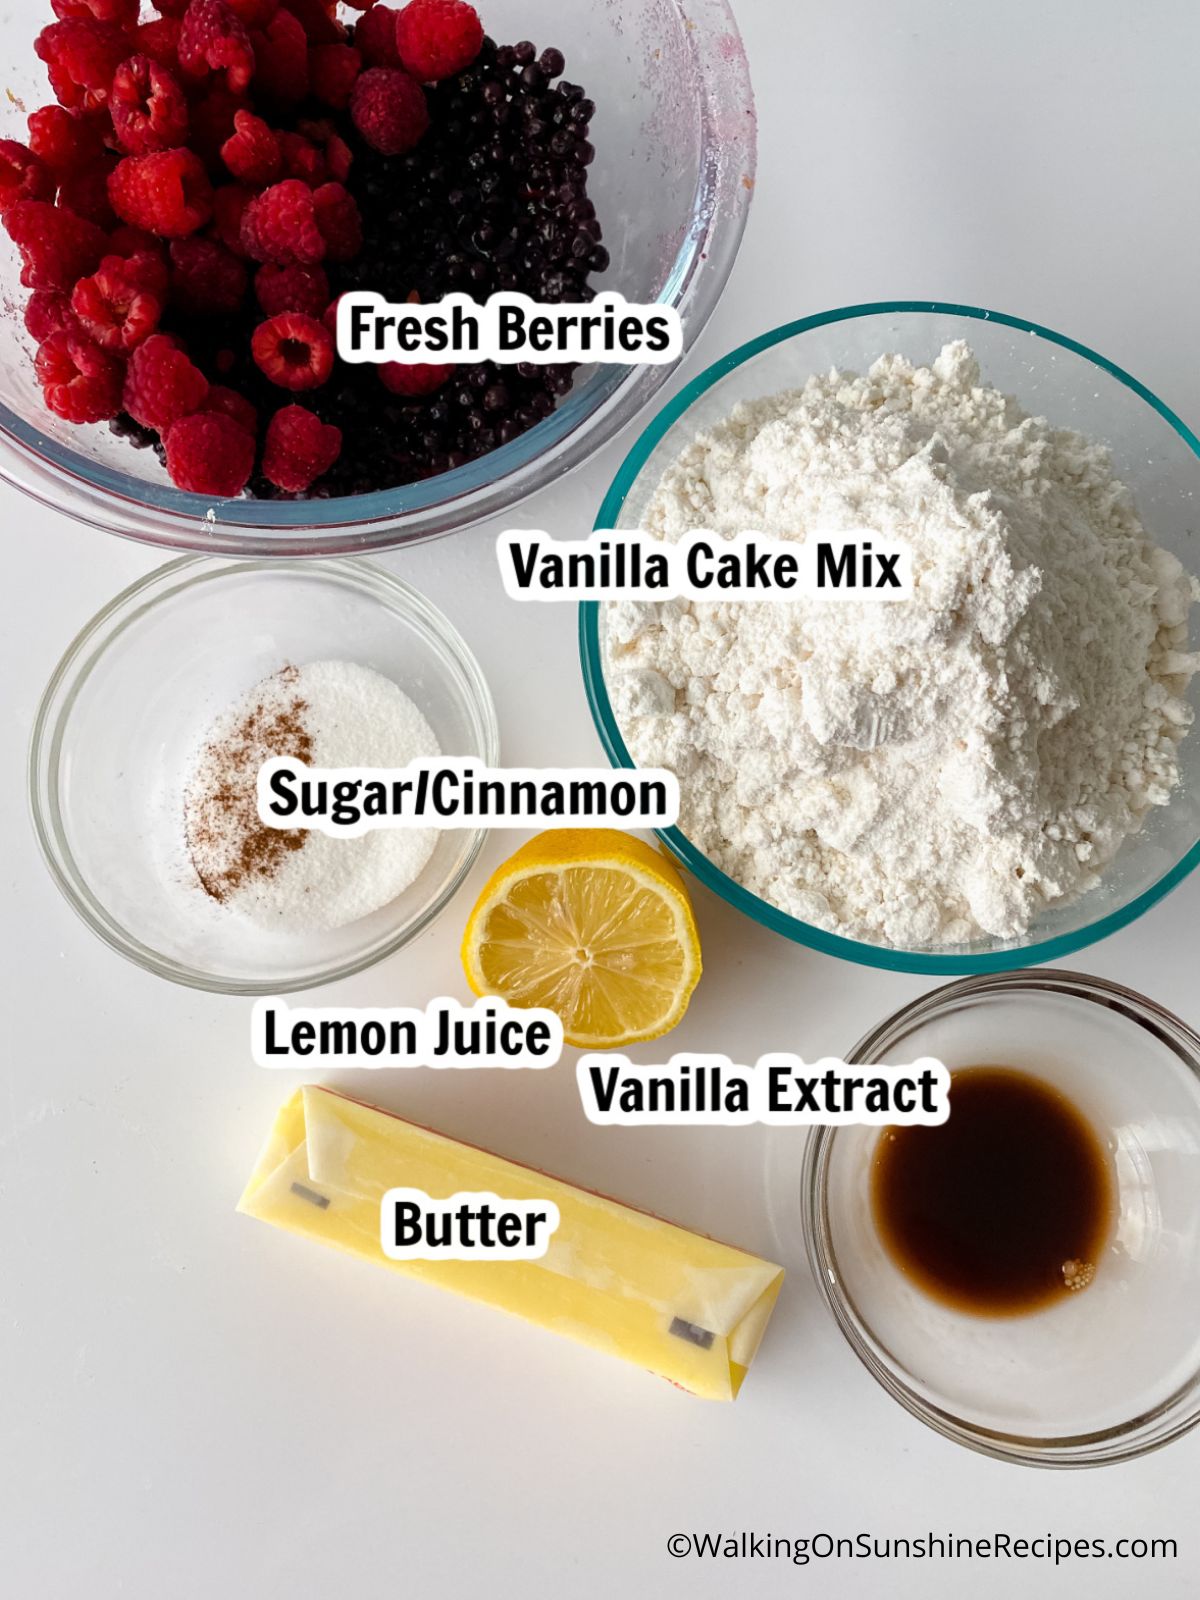 Ingredients for Fresh Berry Dump Cake with Cake Mix.